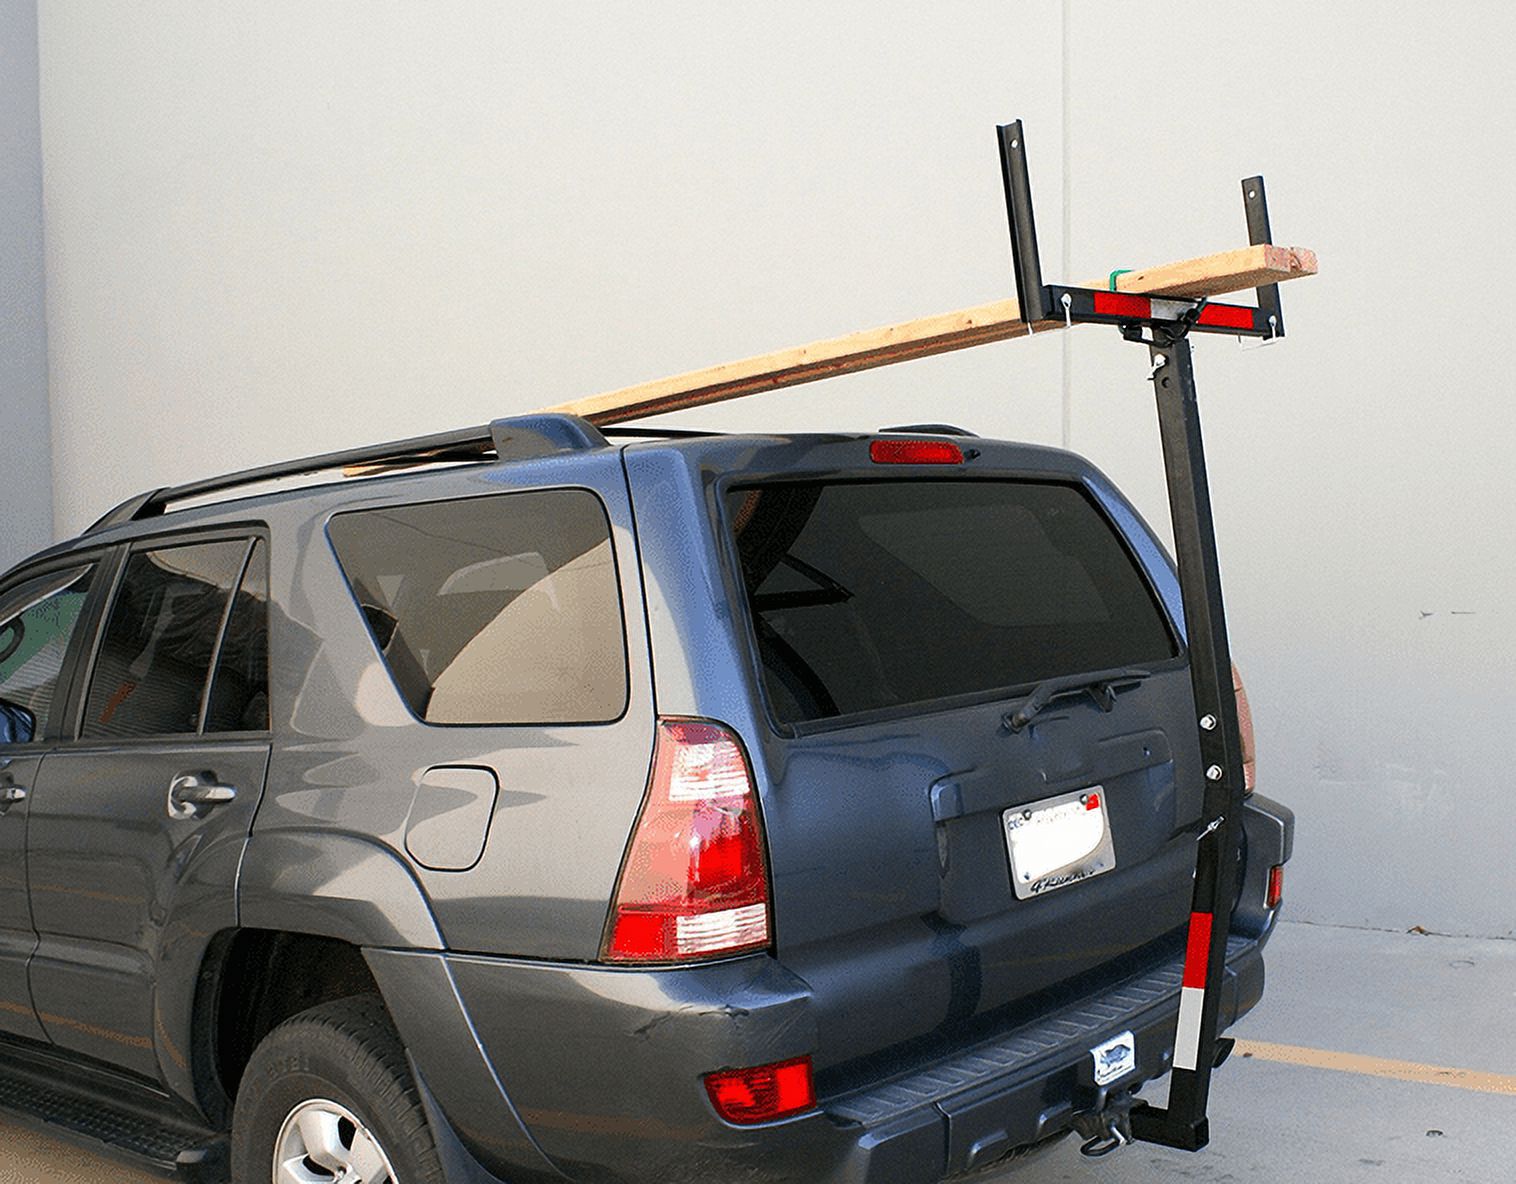 MaxxHaul 70231 Hitch Mount Truck Bed Extender (for Ladder, Rack, Canoe, Kayak, Long Pipes and Lumber) - image 4 of 4